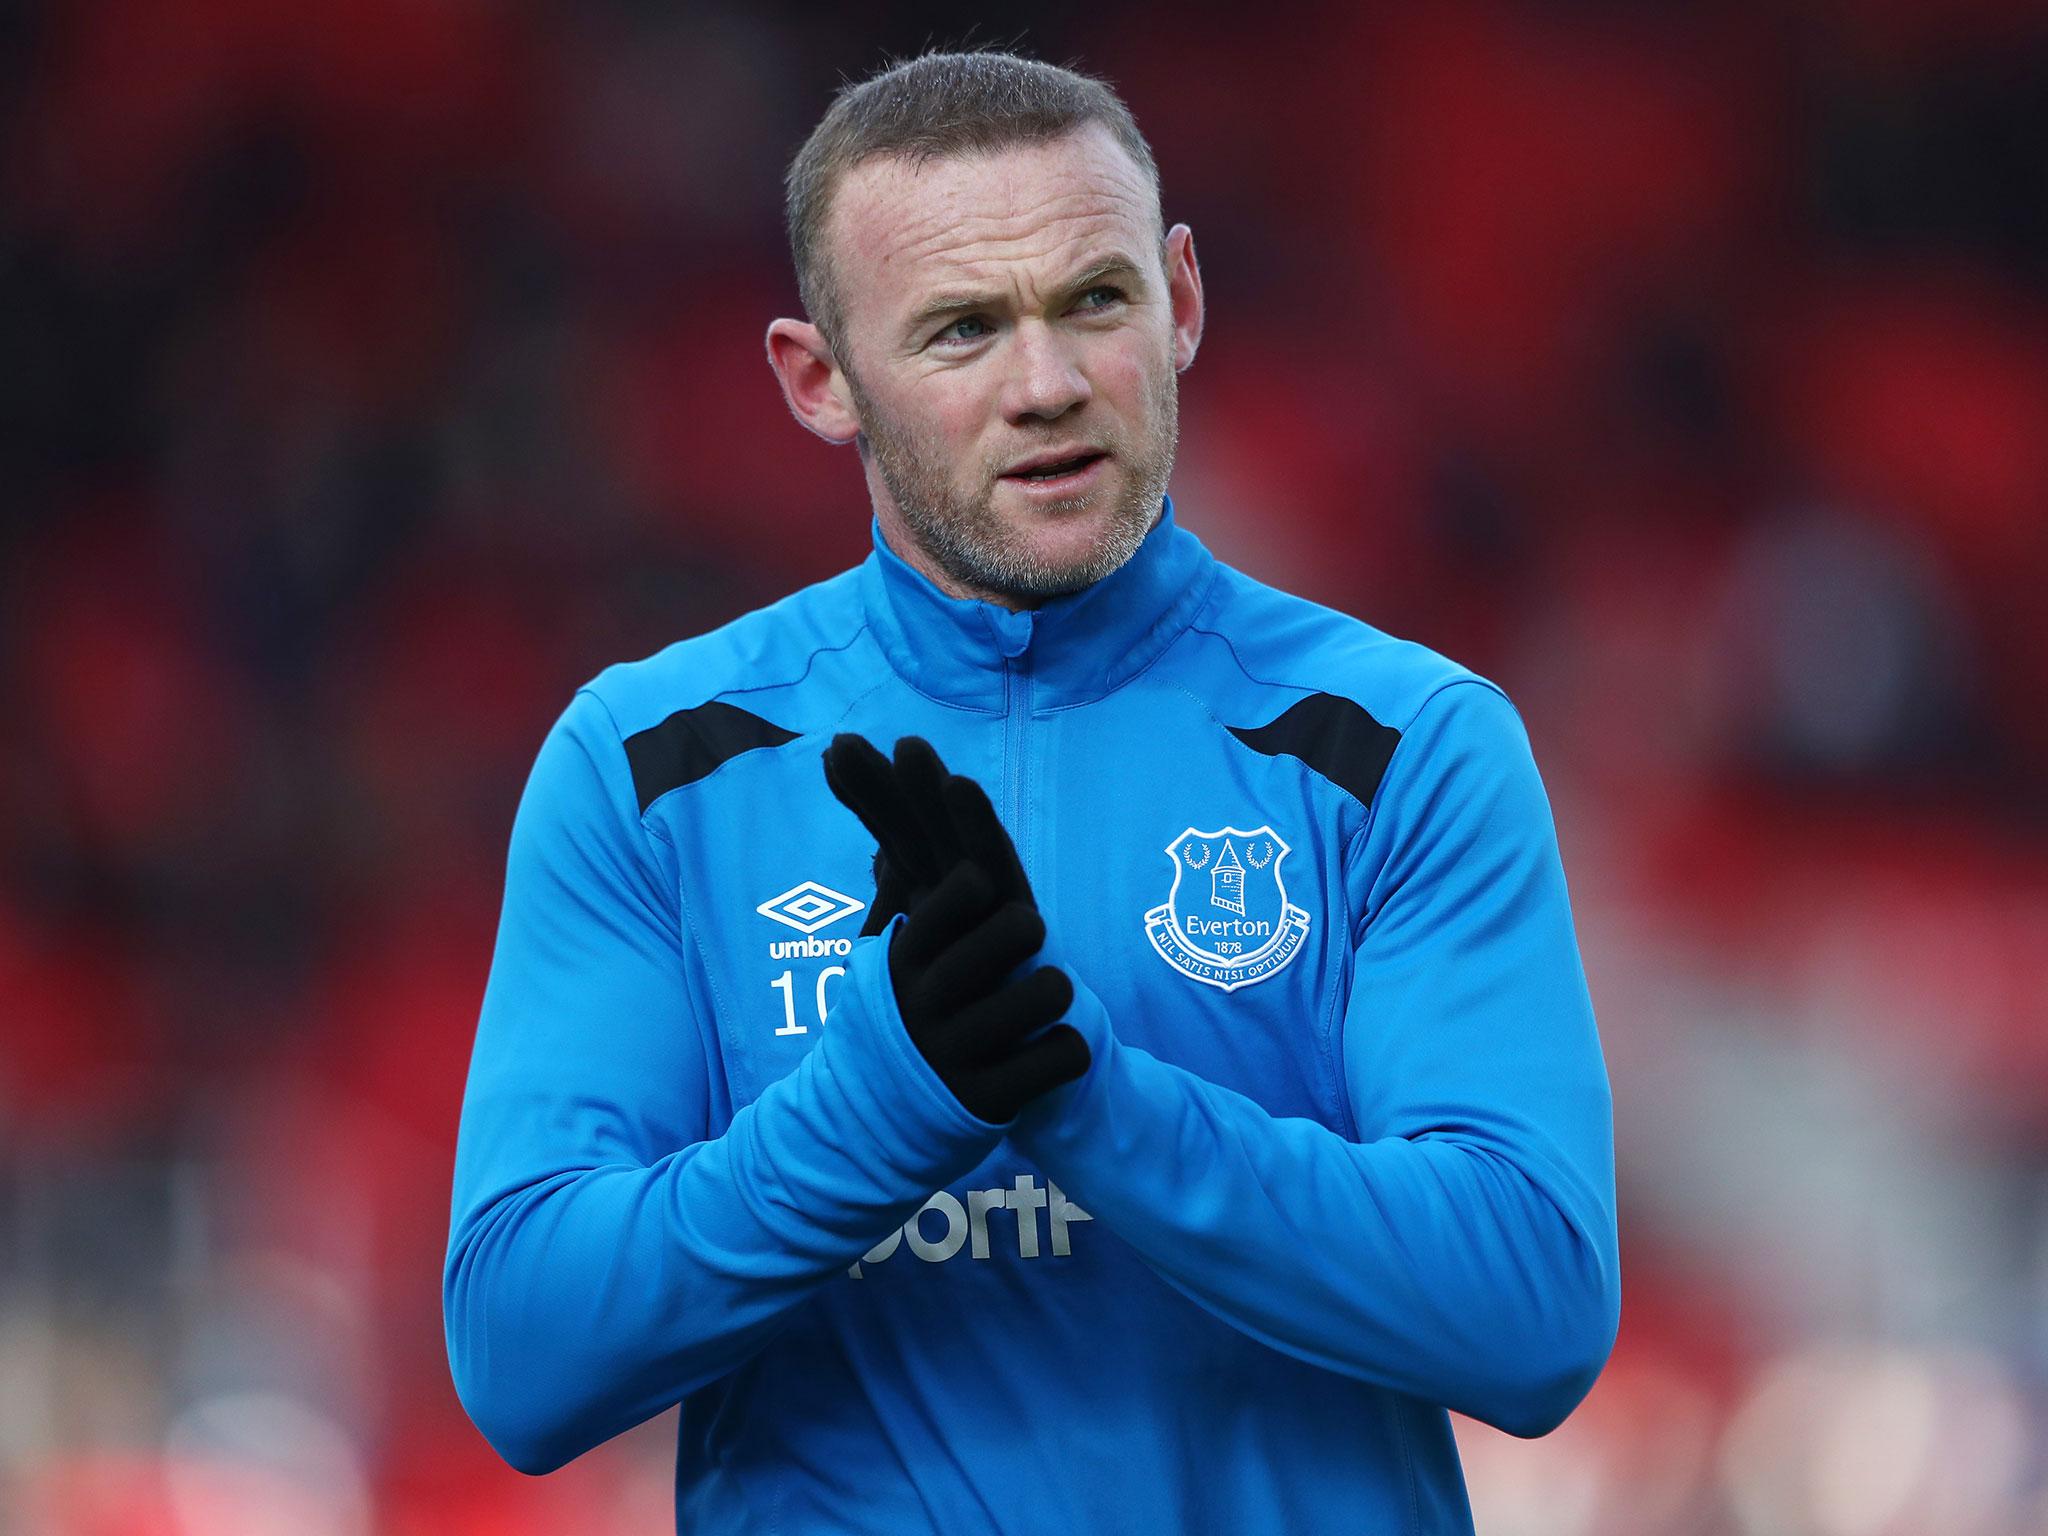 The Everton forward is considering a move to the USA